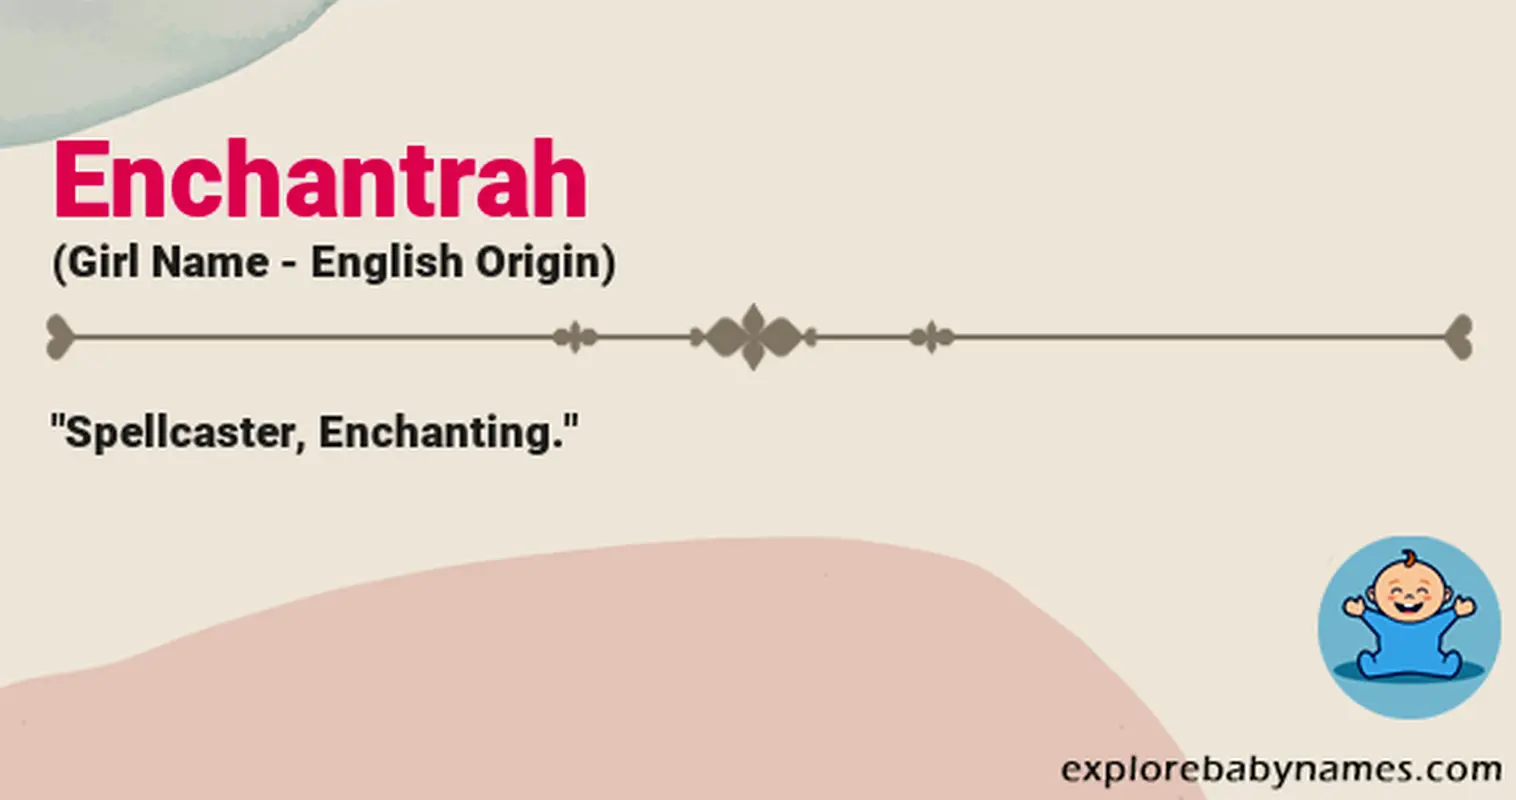 Meaning of Enchantrah